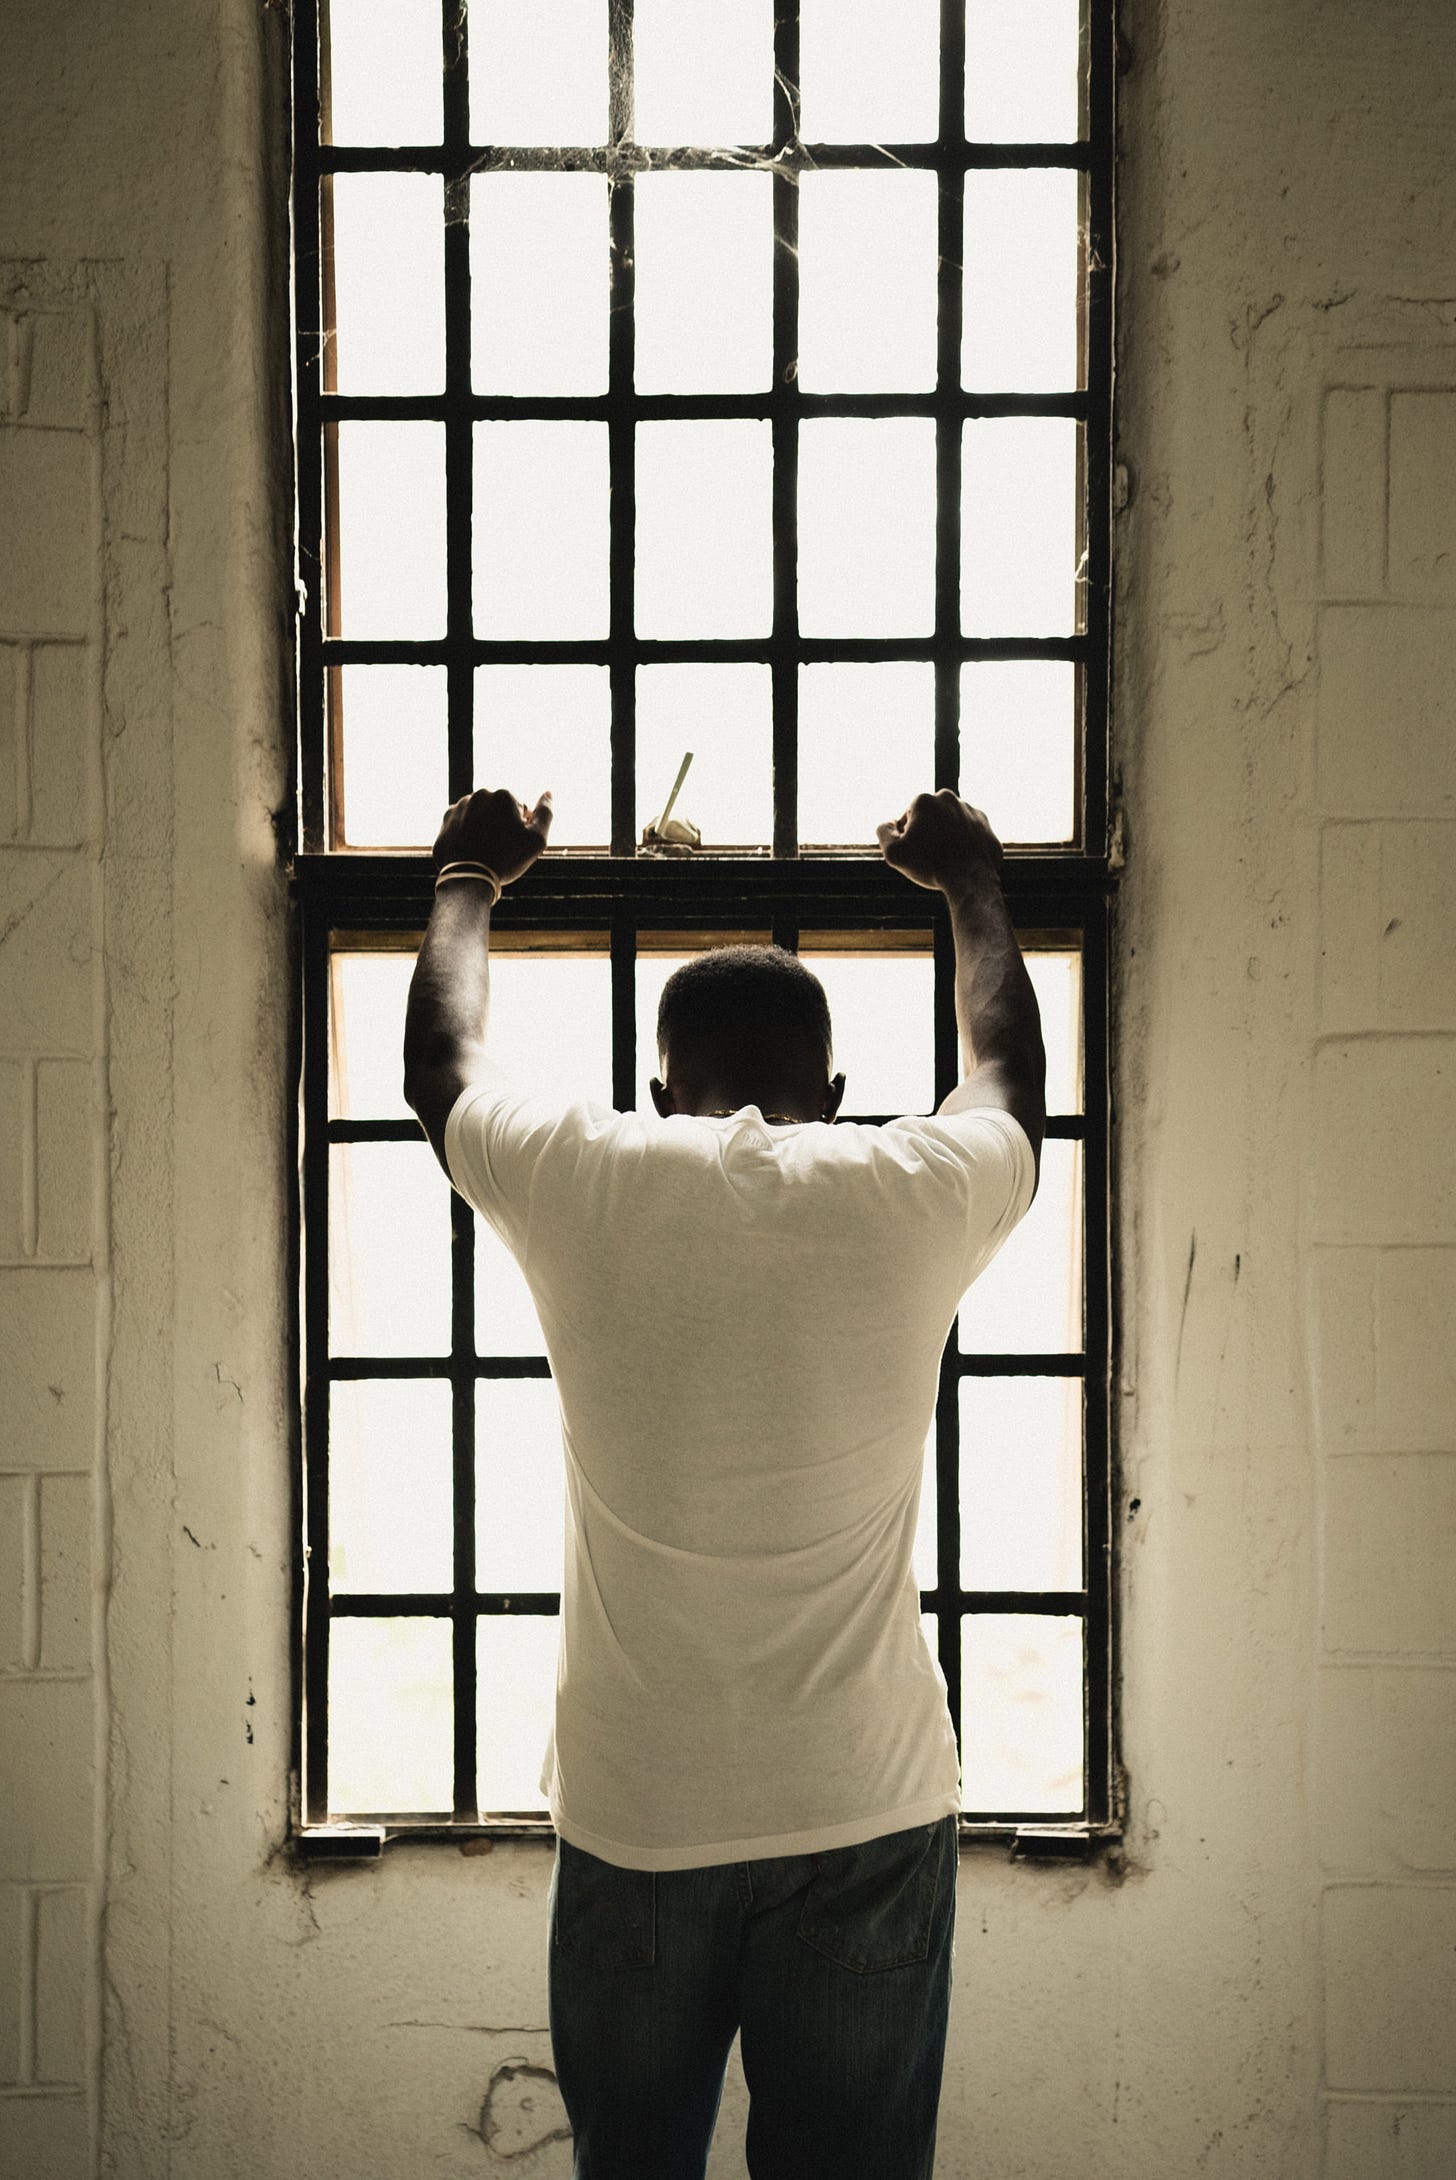 A Black man in a white short-sleeved t-shirt looks out a barred window, his back to the camera.